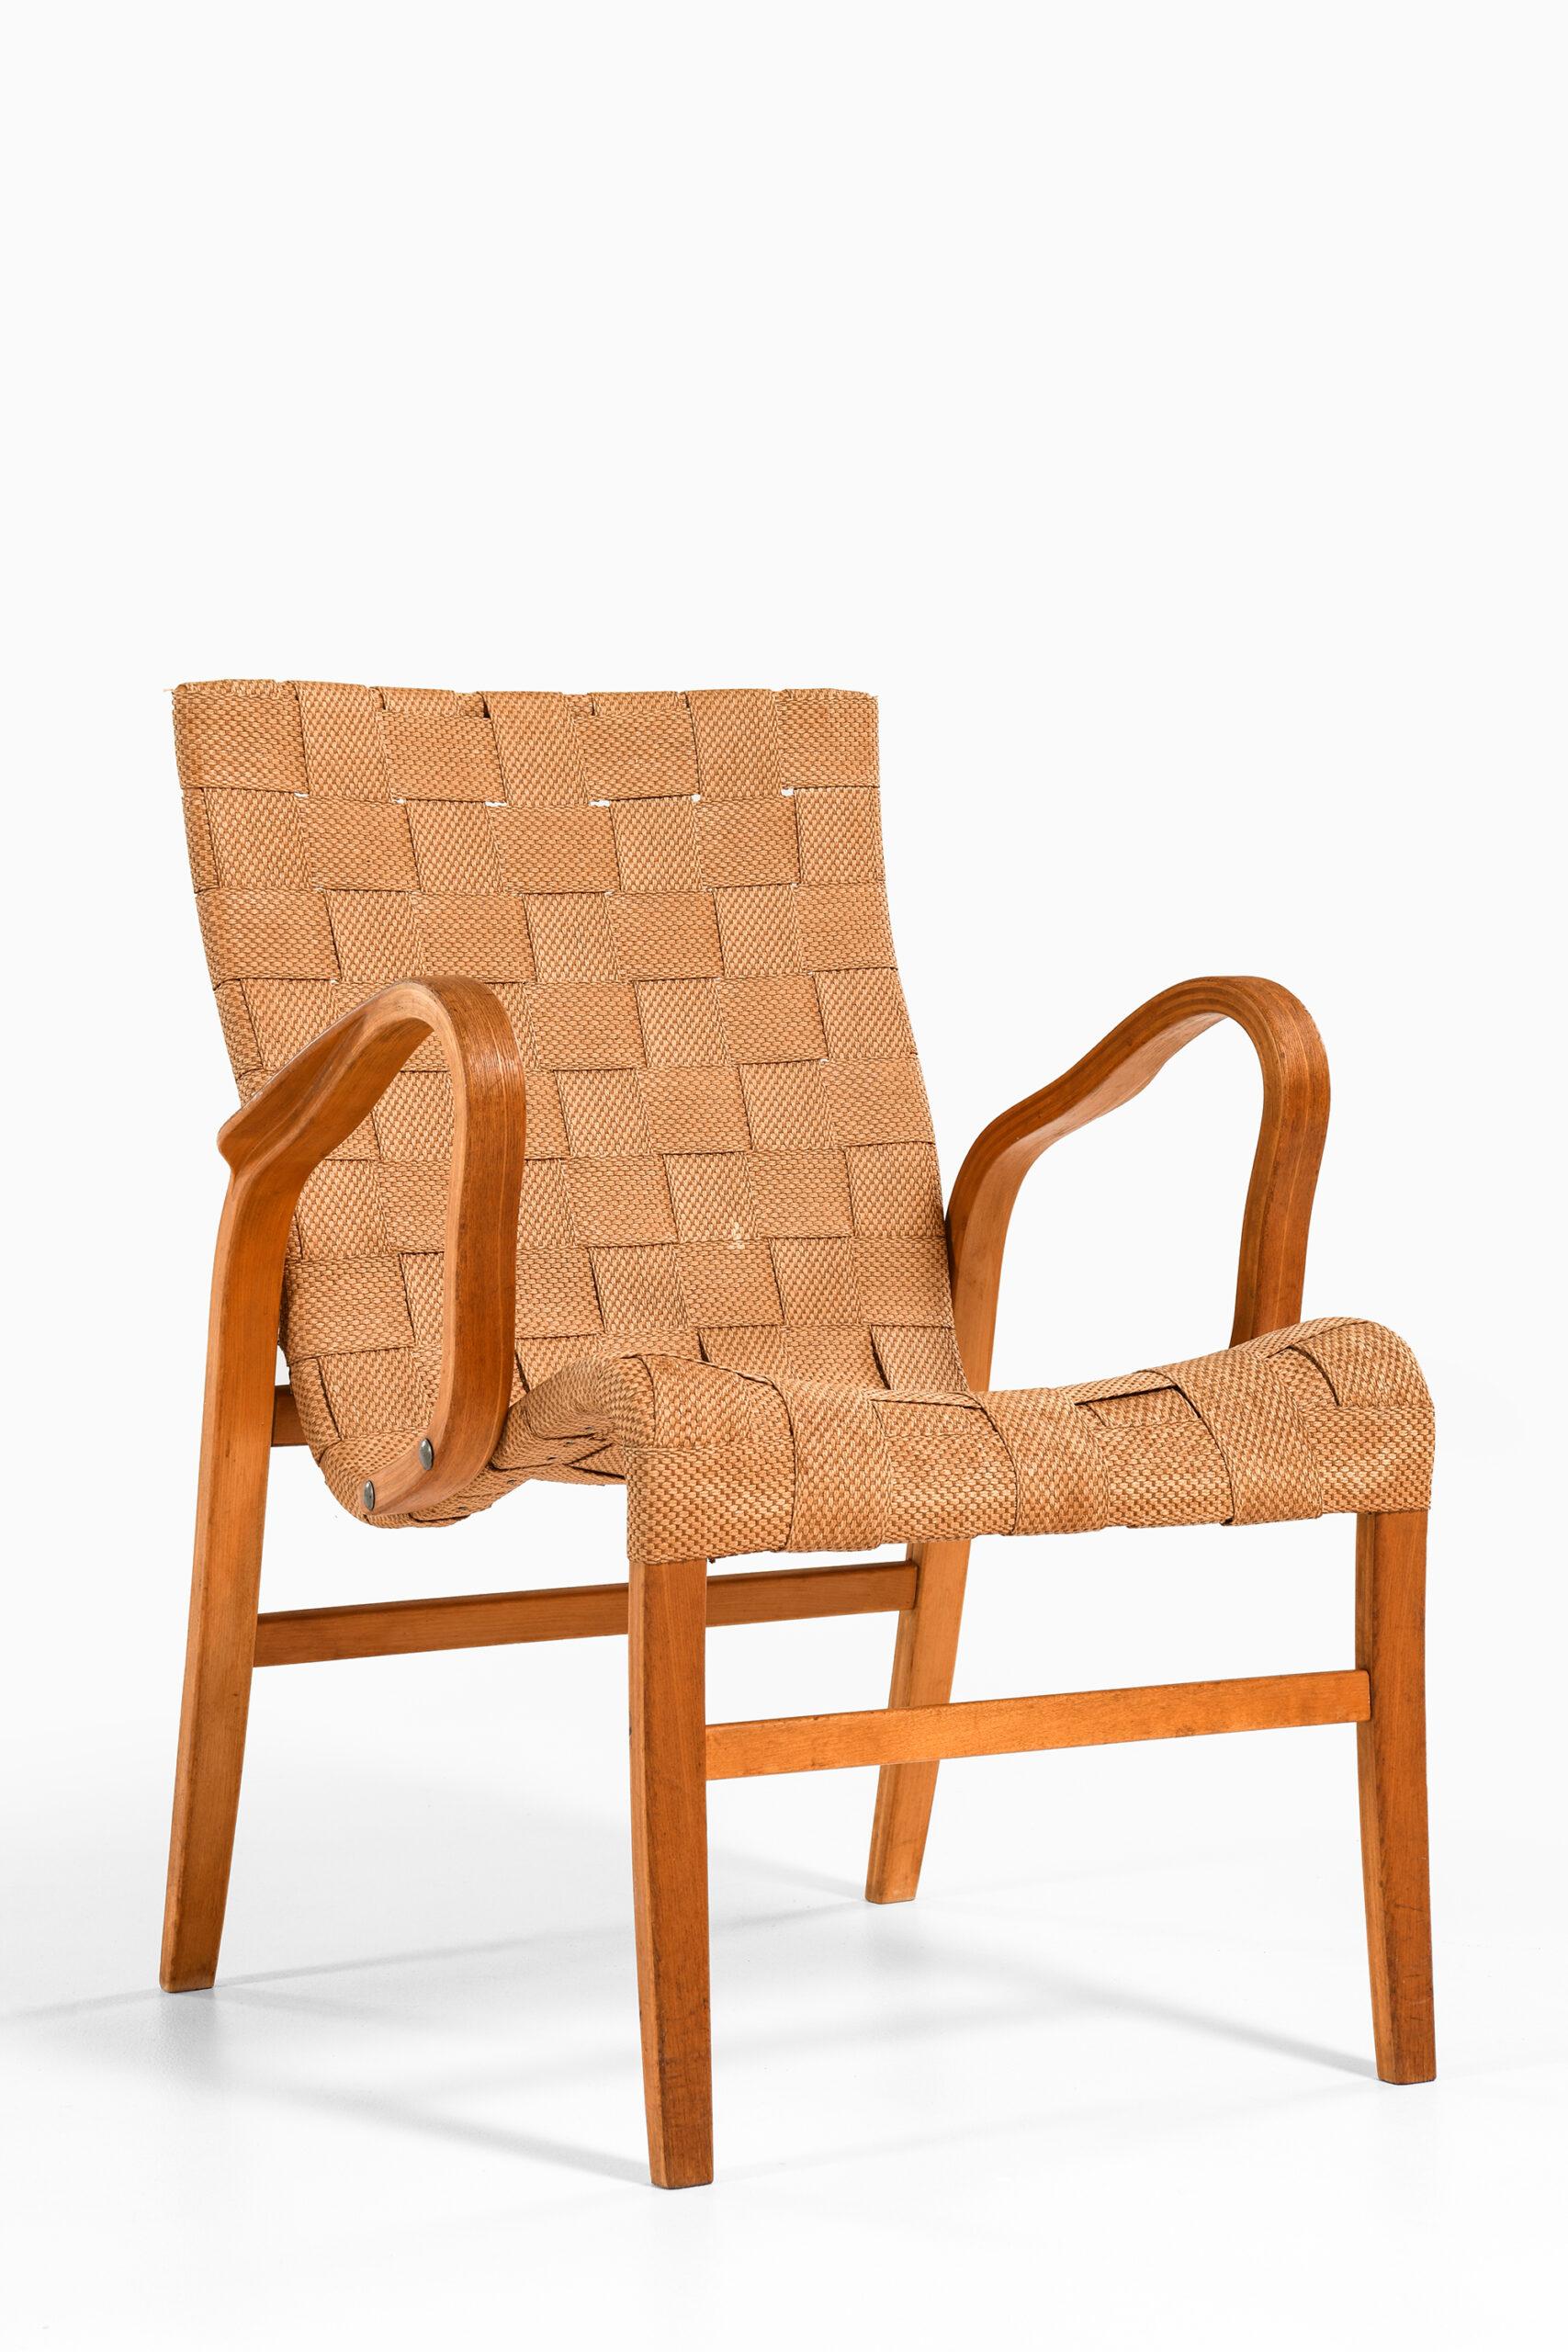 Birch Easy Chair Attributed to Elias Svedberg Produced by Ferdinand Lundquist For Sale